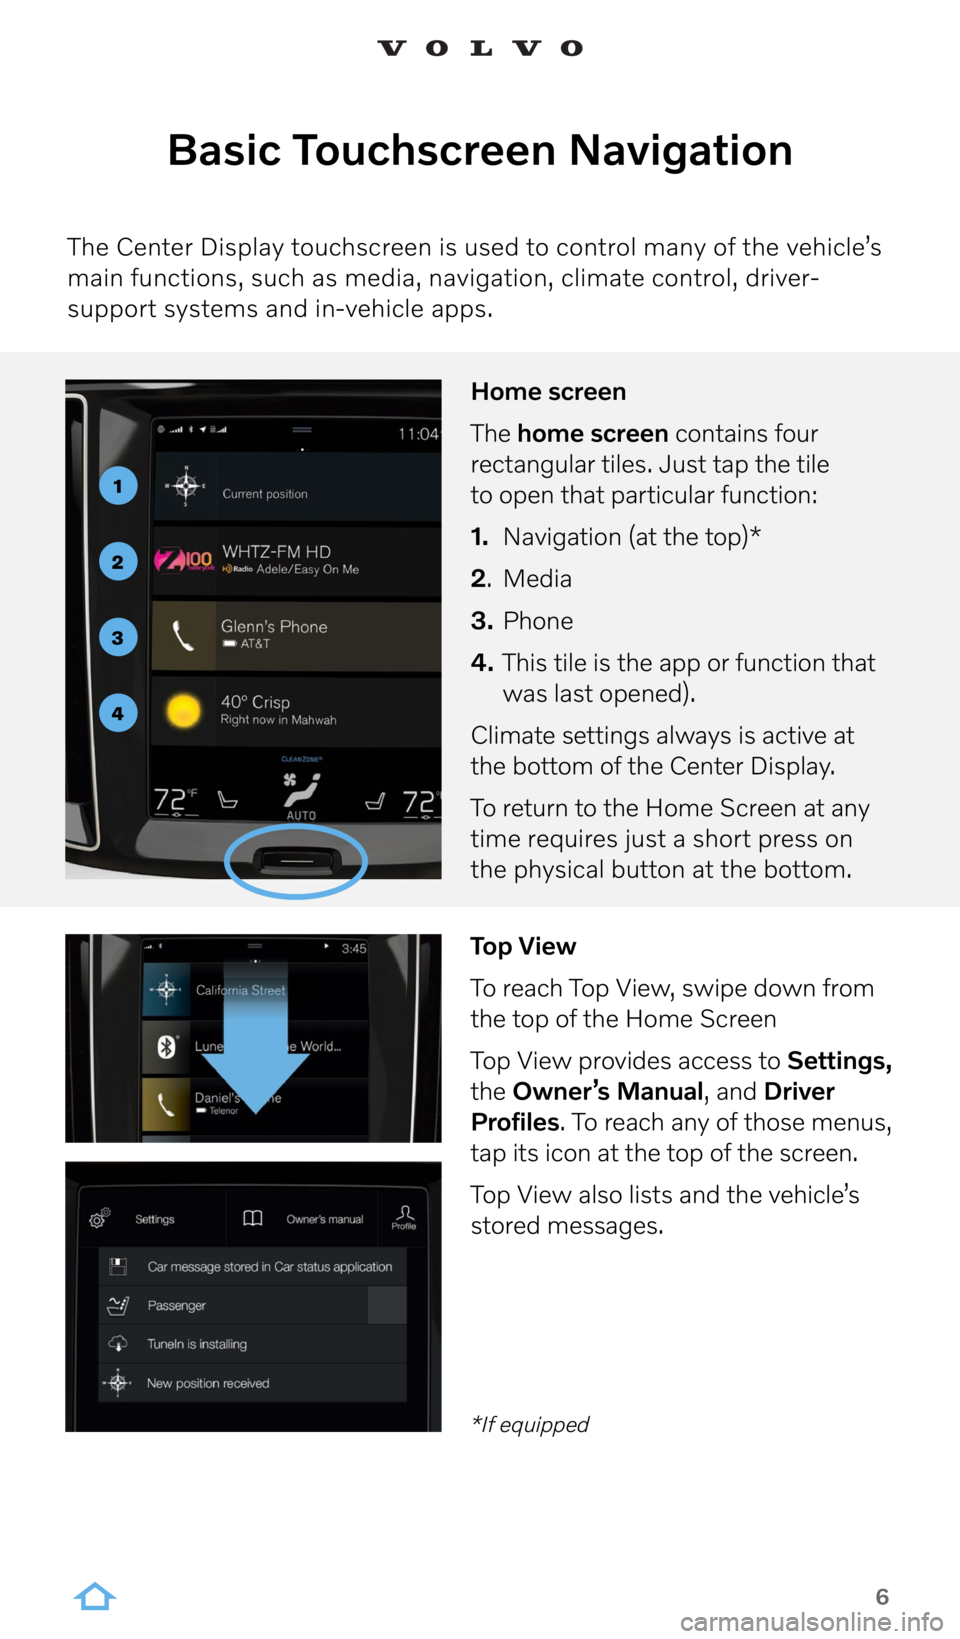 VOLVO XC90 2022  Sensus Digital Guide 6
Basic Touchscreen Navigation
The Center Display touchscreen is used to control many of the vehicle’s 
main functions, such as media, navigation, climate control, driver-
support systems and in-veh